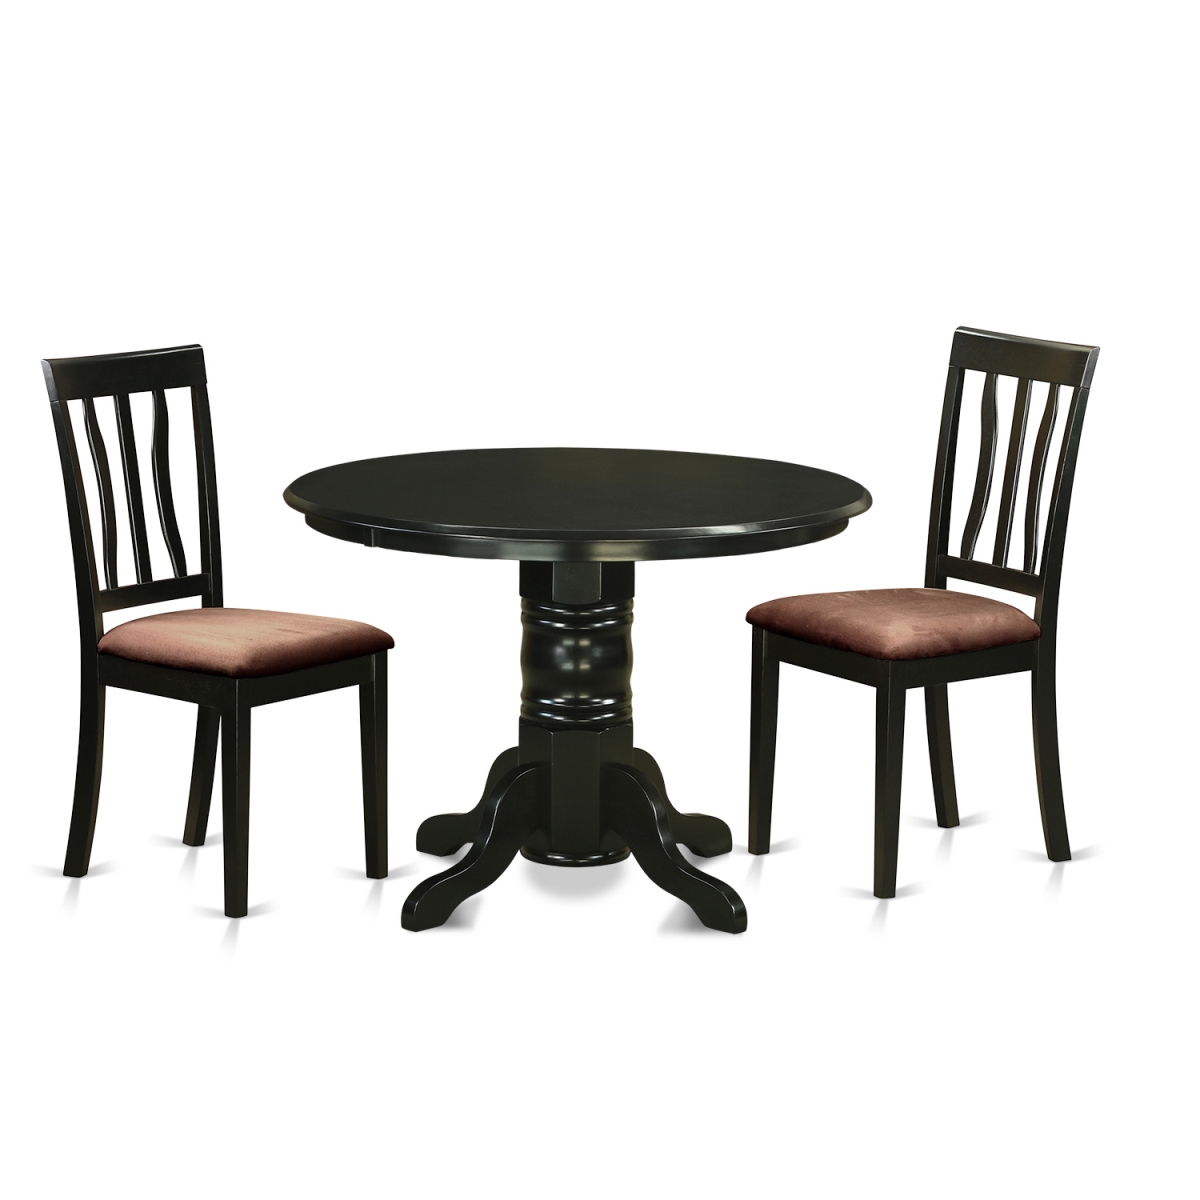 Dinette Table Set - Small Kitchen Table & 2 Chairs, Black - 3 Piece